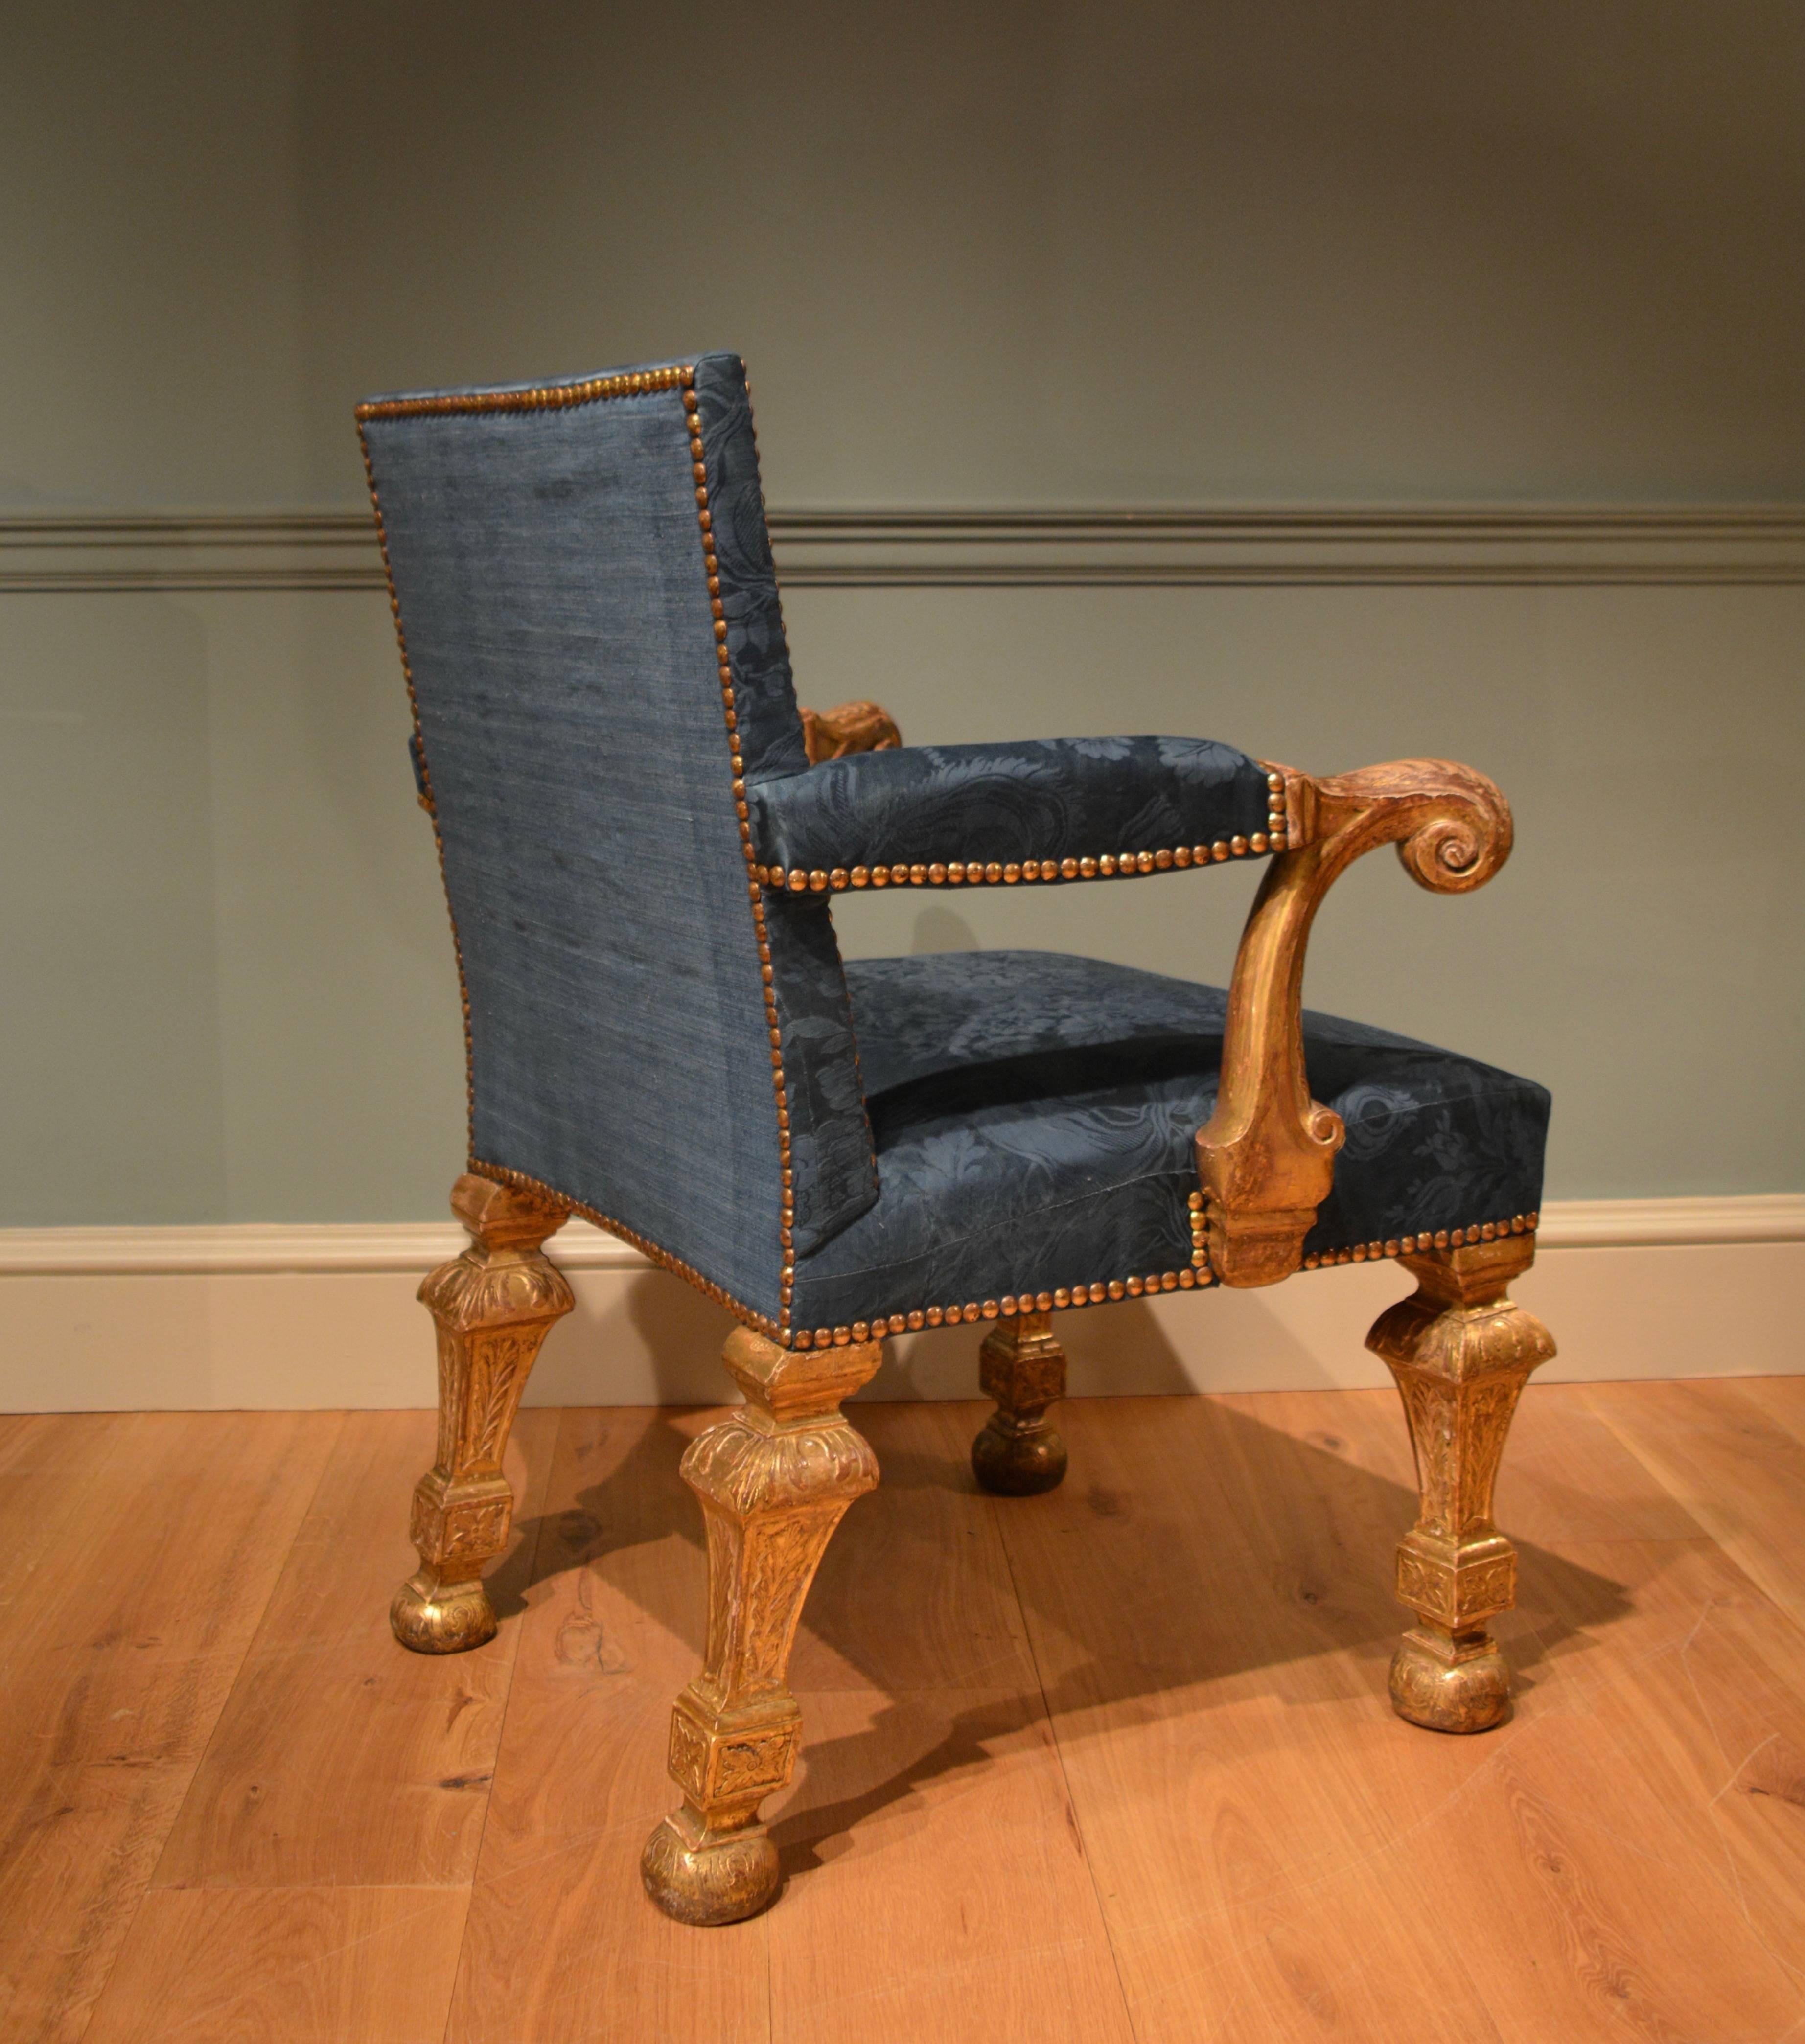 A fine and rare early 18th century gilt armchair with upholstered seat and back, the padded out scrolling gilt arms above four square inverted pillar legs decorated with fine cut gesso work. This chair retains it's original gilt surface and is